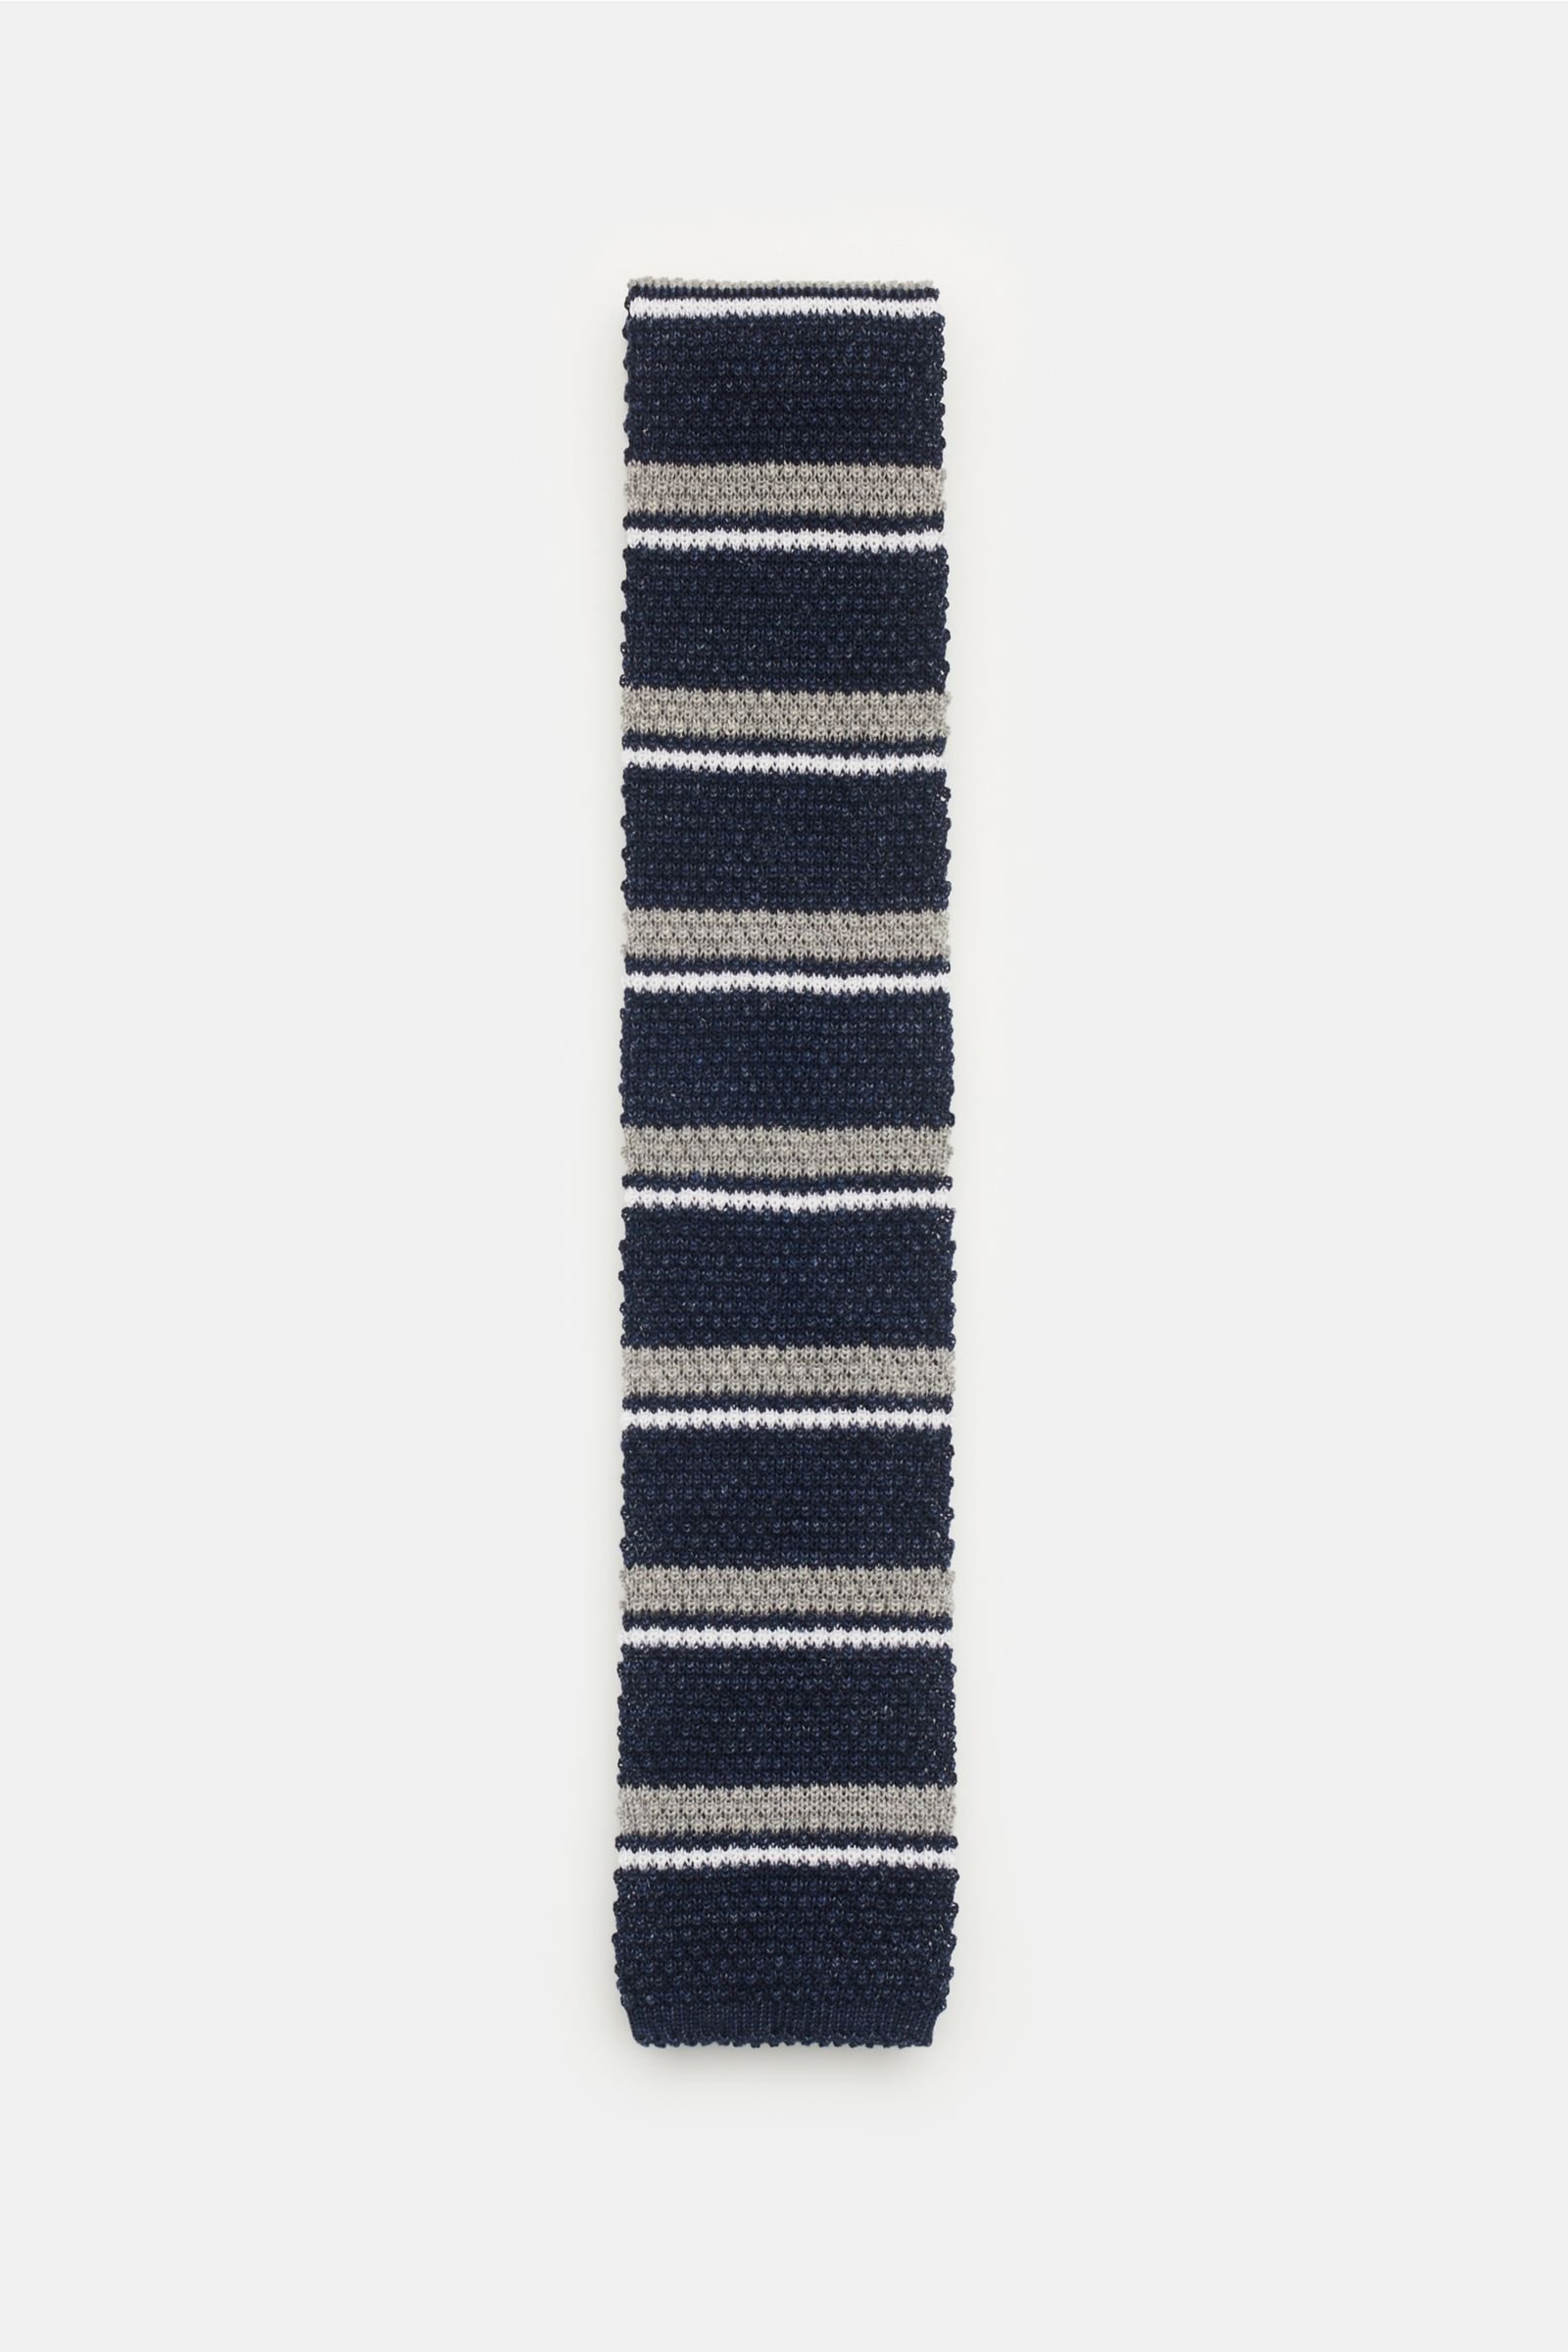 Knitted tie navy/grey striped